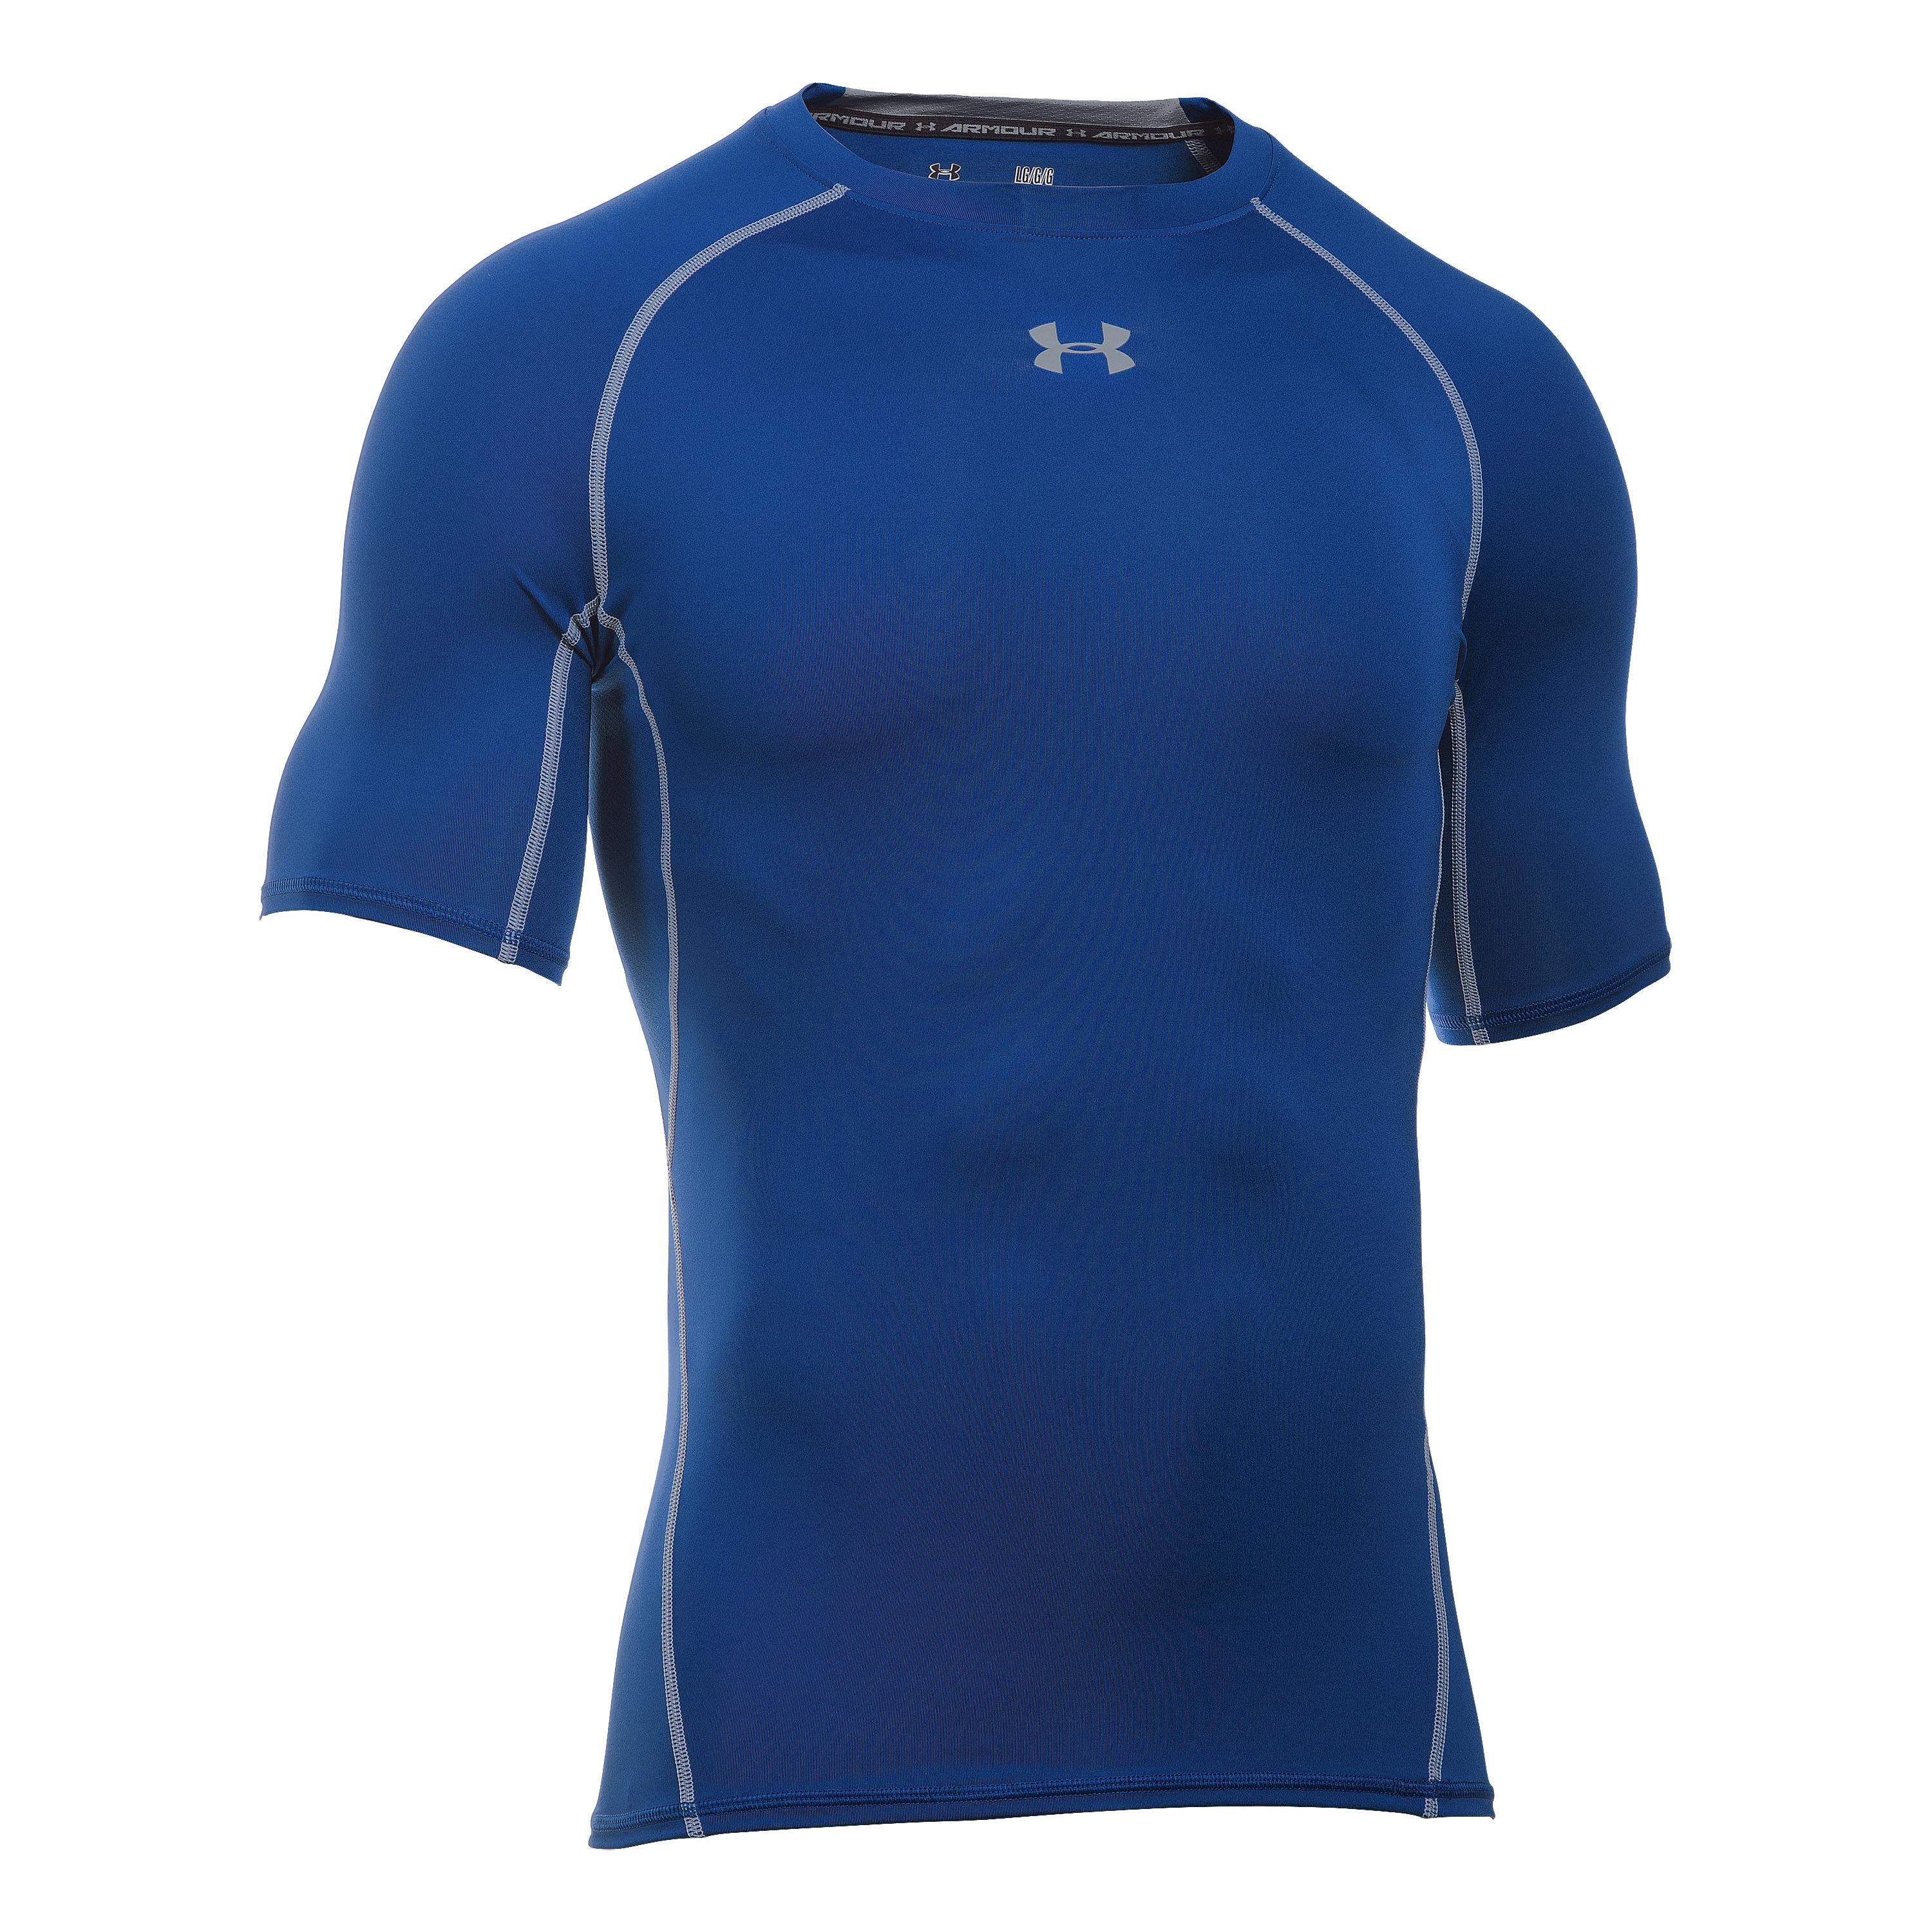 Purchase the Under Armour HeatGear Compression Short Sleeve blue